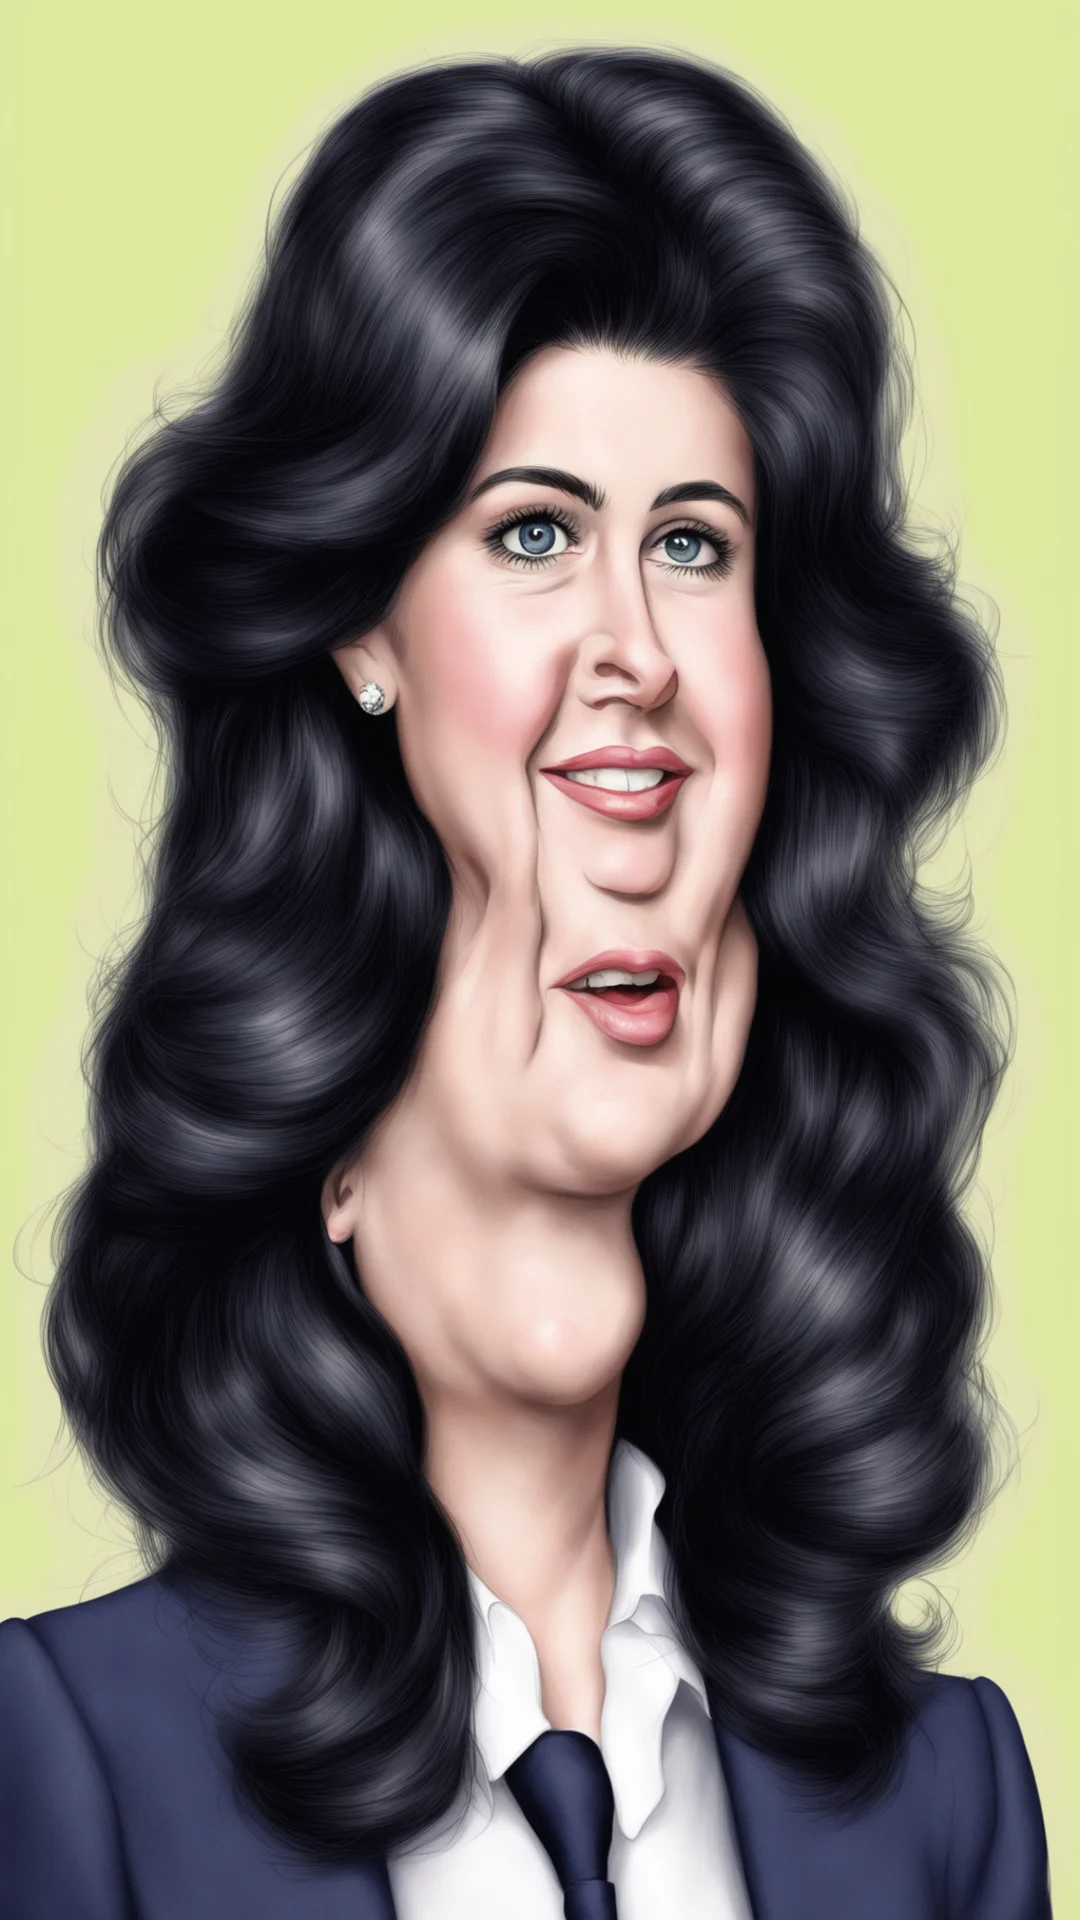 monica lewinsky caricature amazing awesome portrait 2 tall